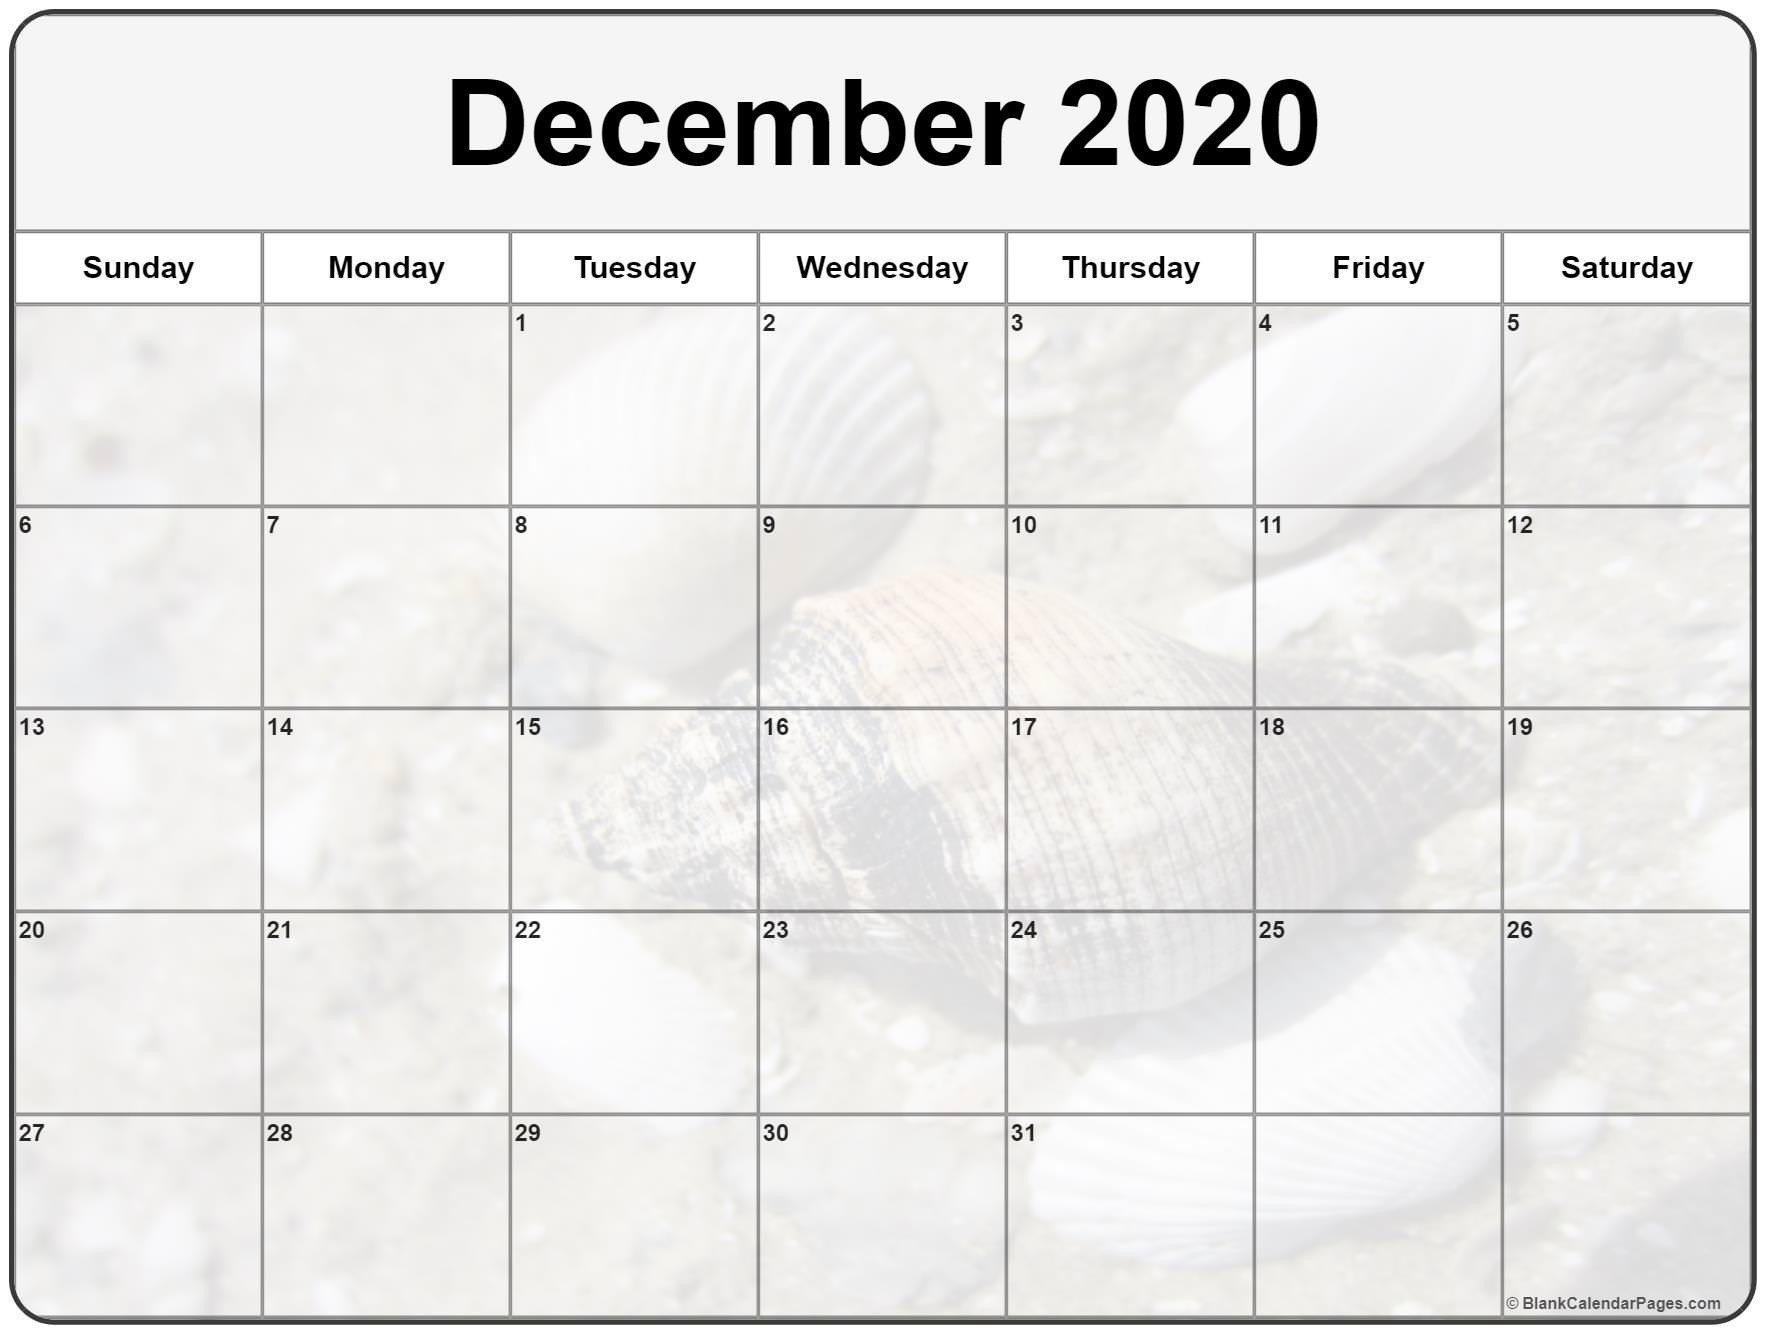 collection of december 2020 photo calendars with image